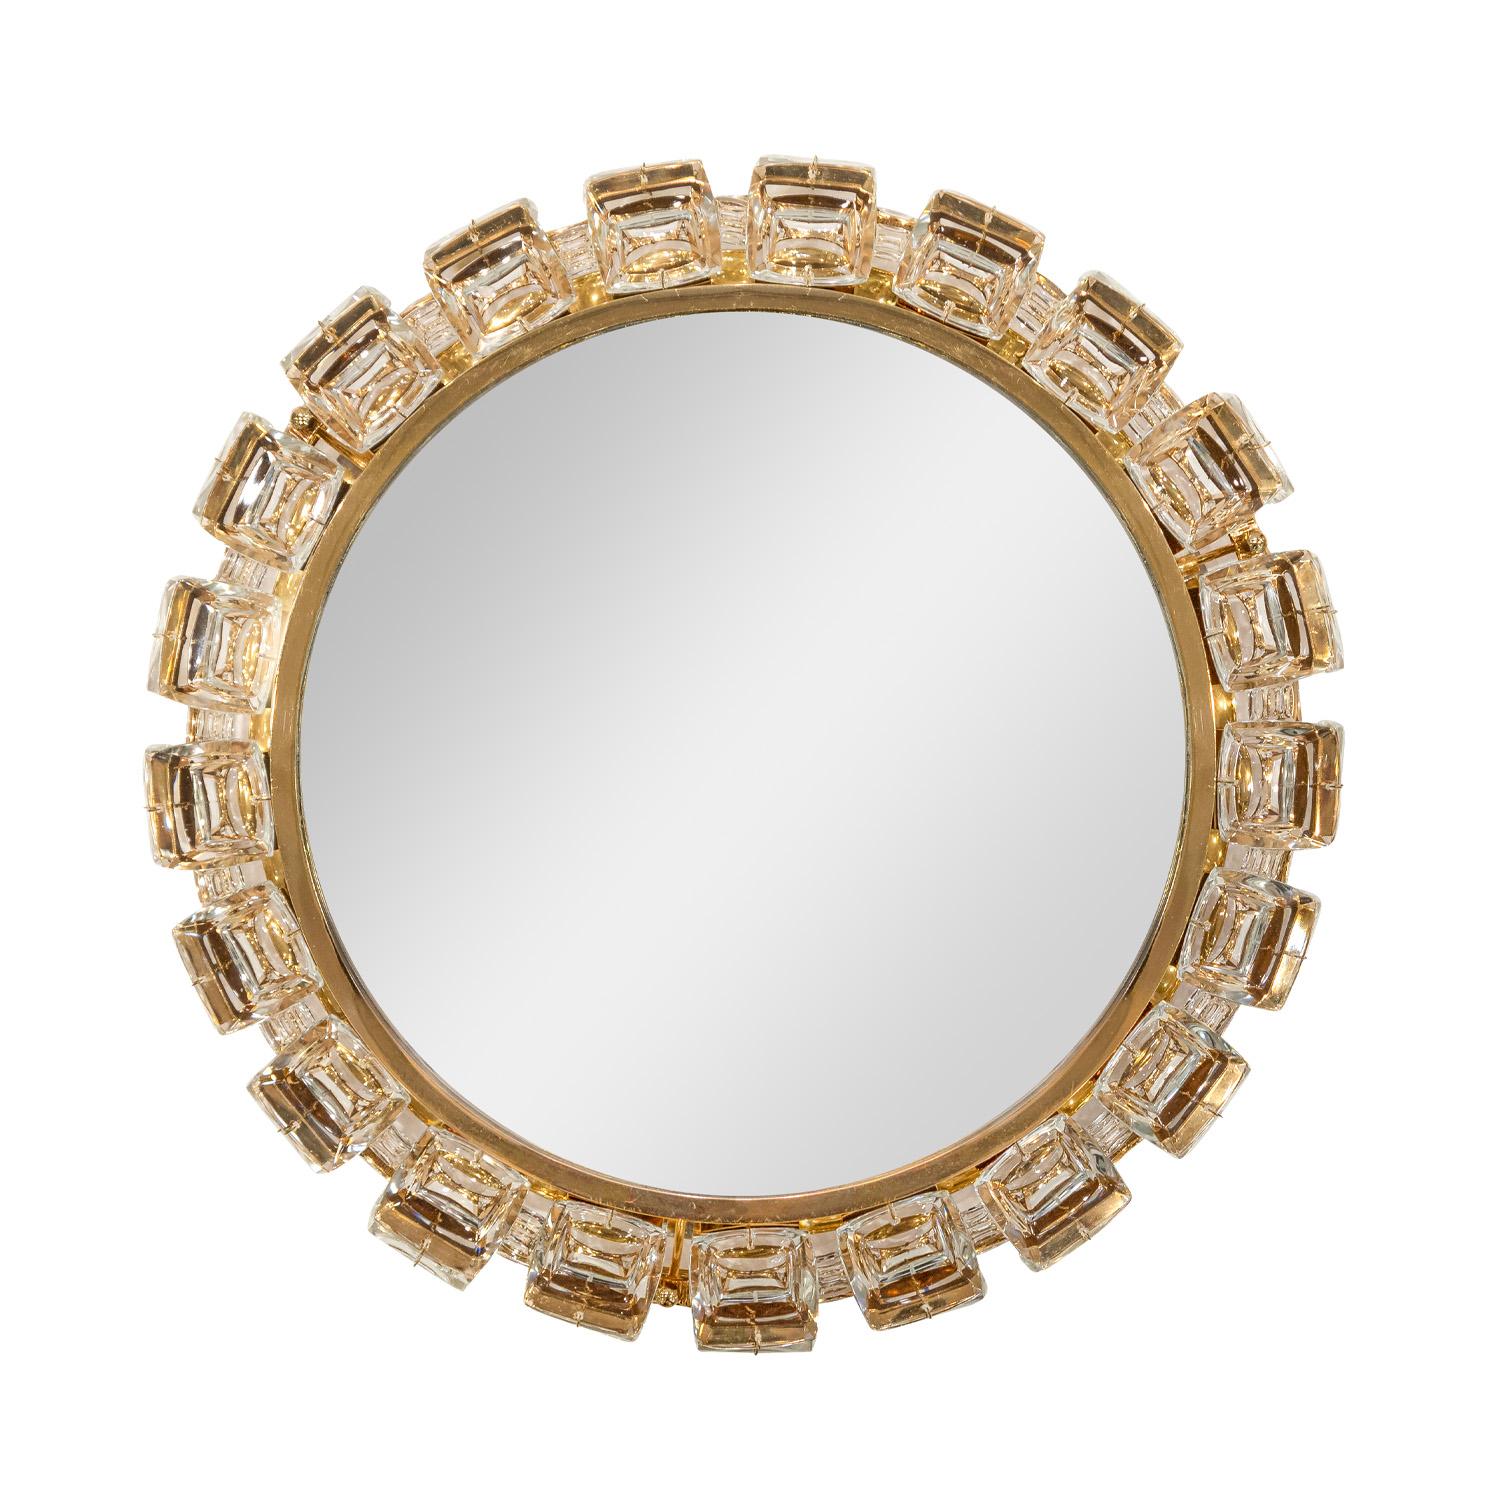 Stunning wall mounted illuminating circular mirror model No. 2349 in 24 karat gold-plated brass with molded crystals around the perimeter by Palme & Walter, Germany 1960s (signed with original label on back). This mirror is extremely luxurious and